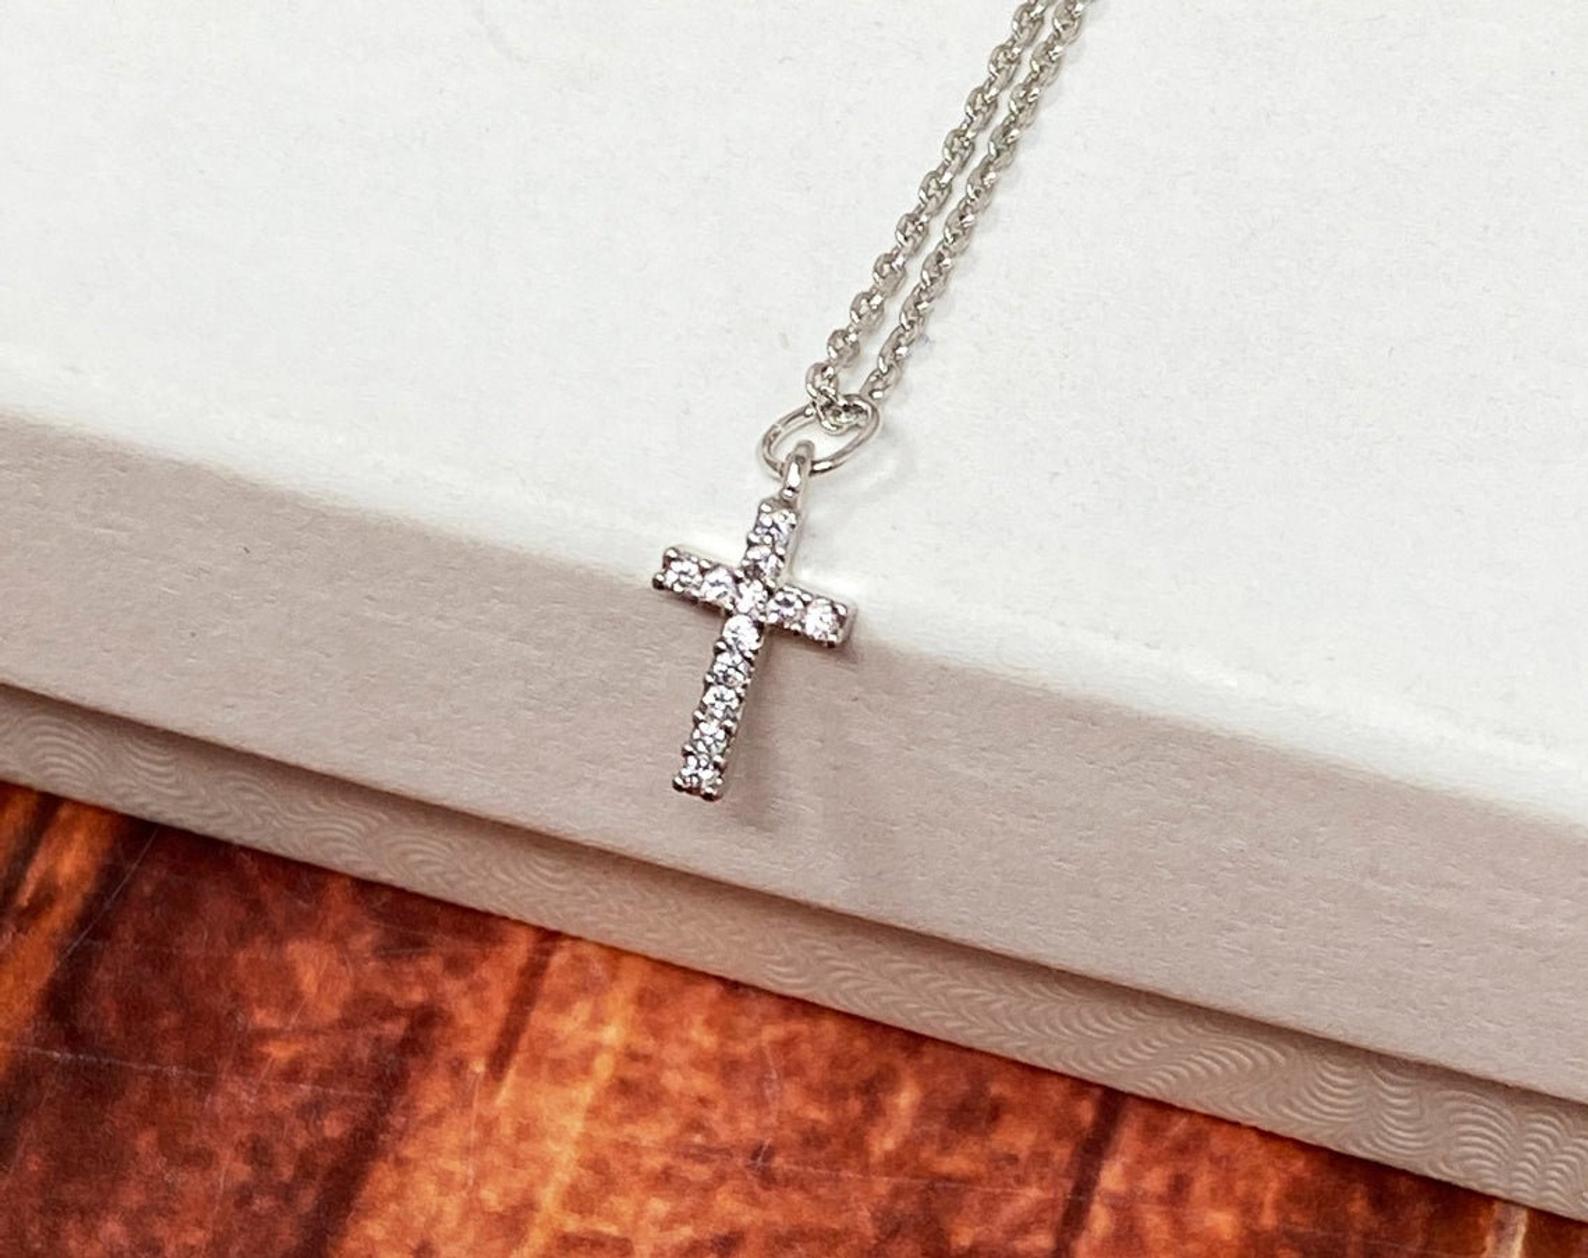 Baptism Jewelry Gifts and Other Religious Jewelry Gifts | Kay